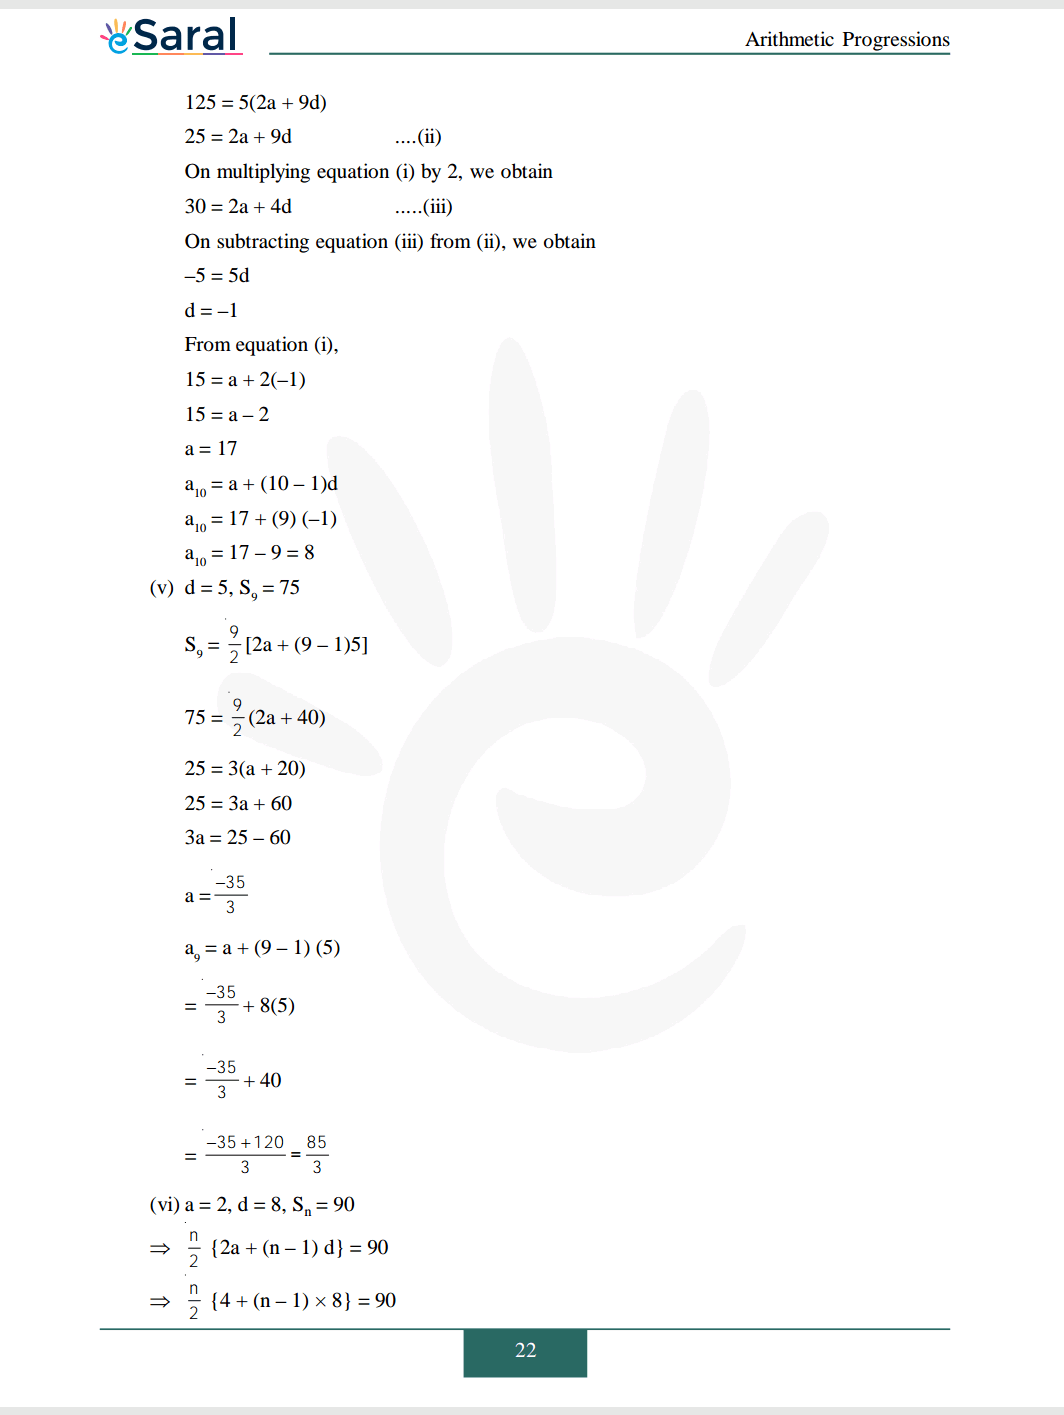 Class 10 Maths Chapter 5 exercise 5.3 solutions Image 5